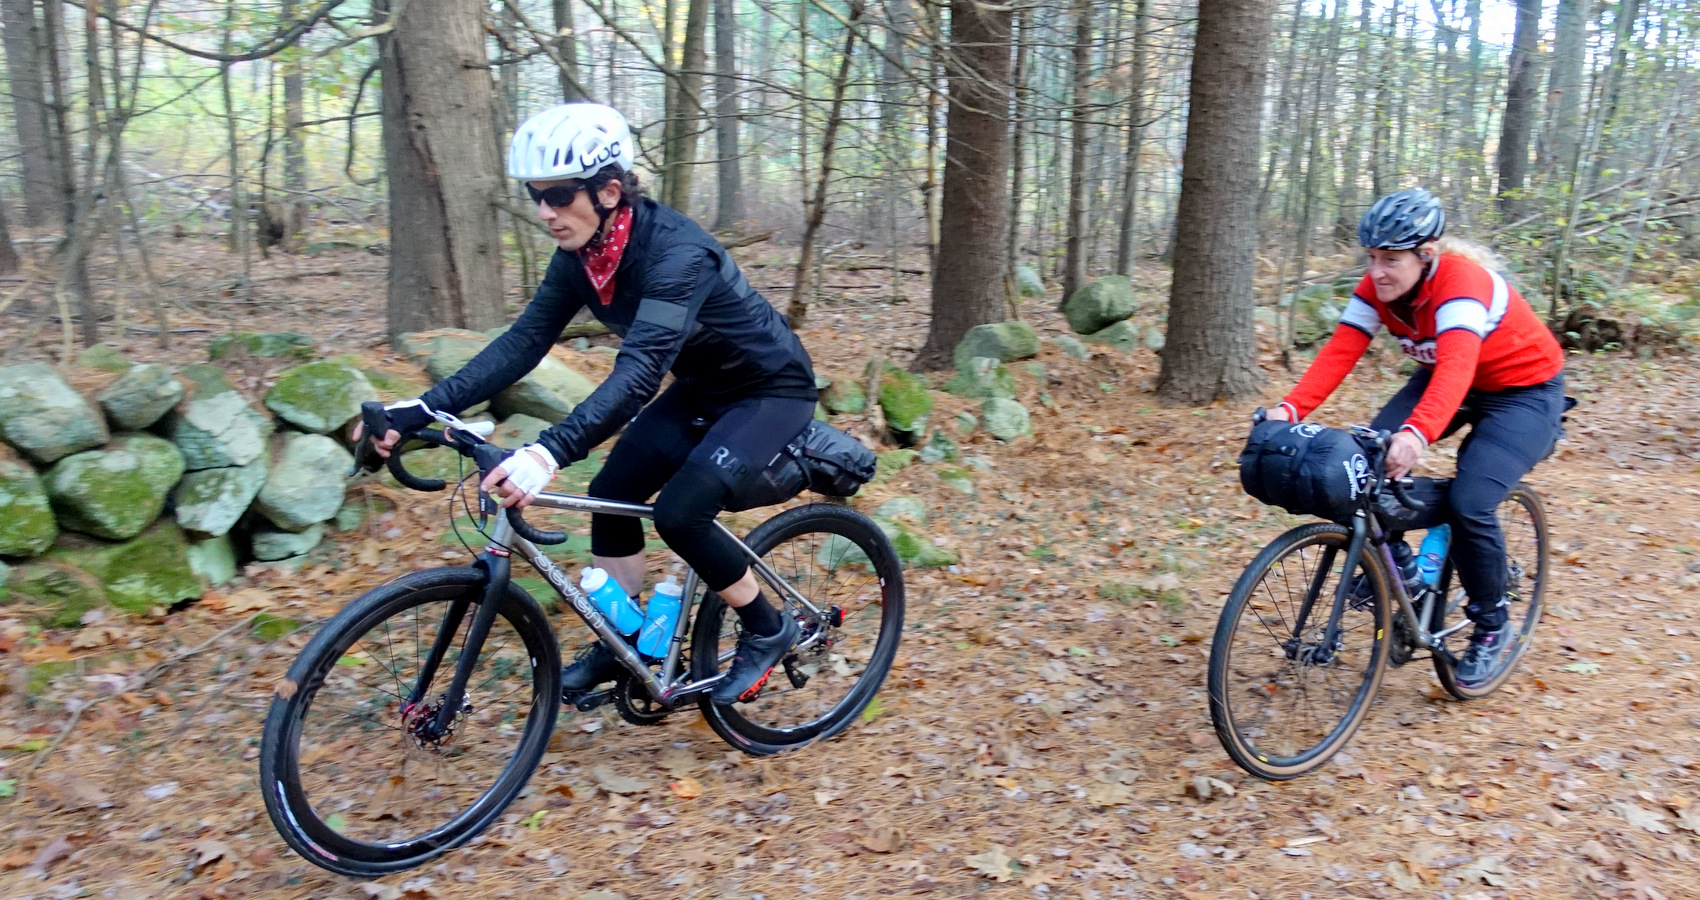 Bikepacking on a New England country road in autumn